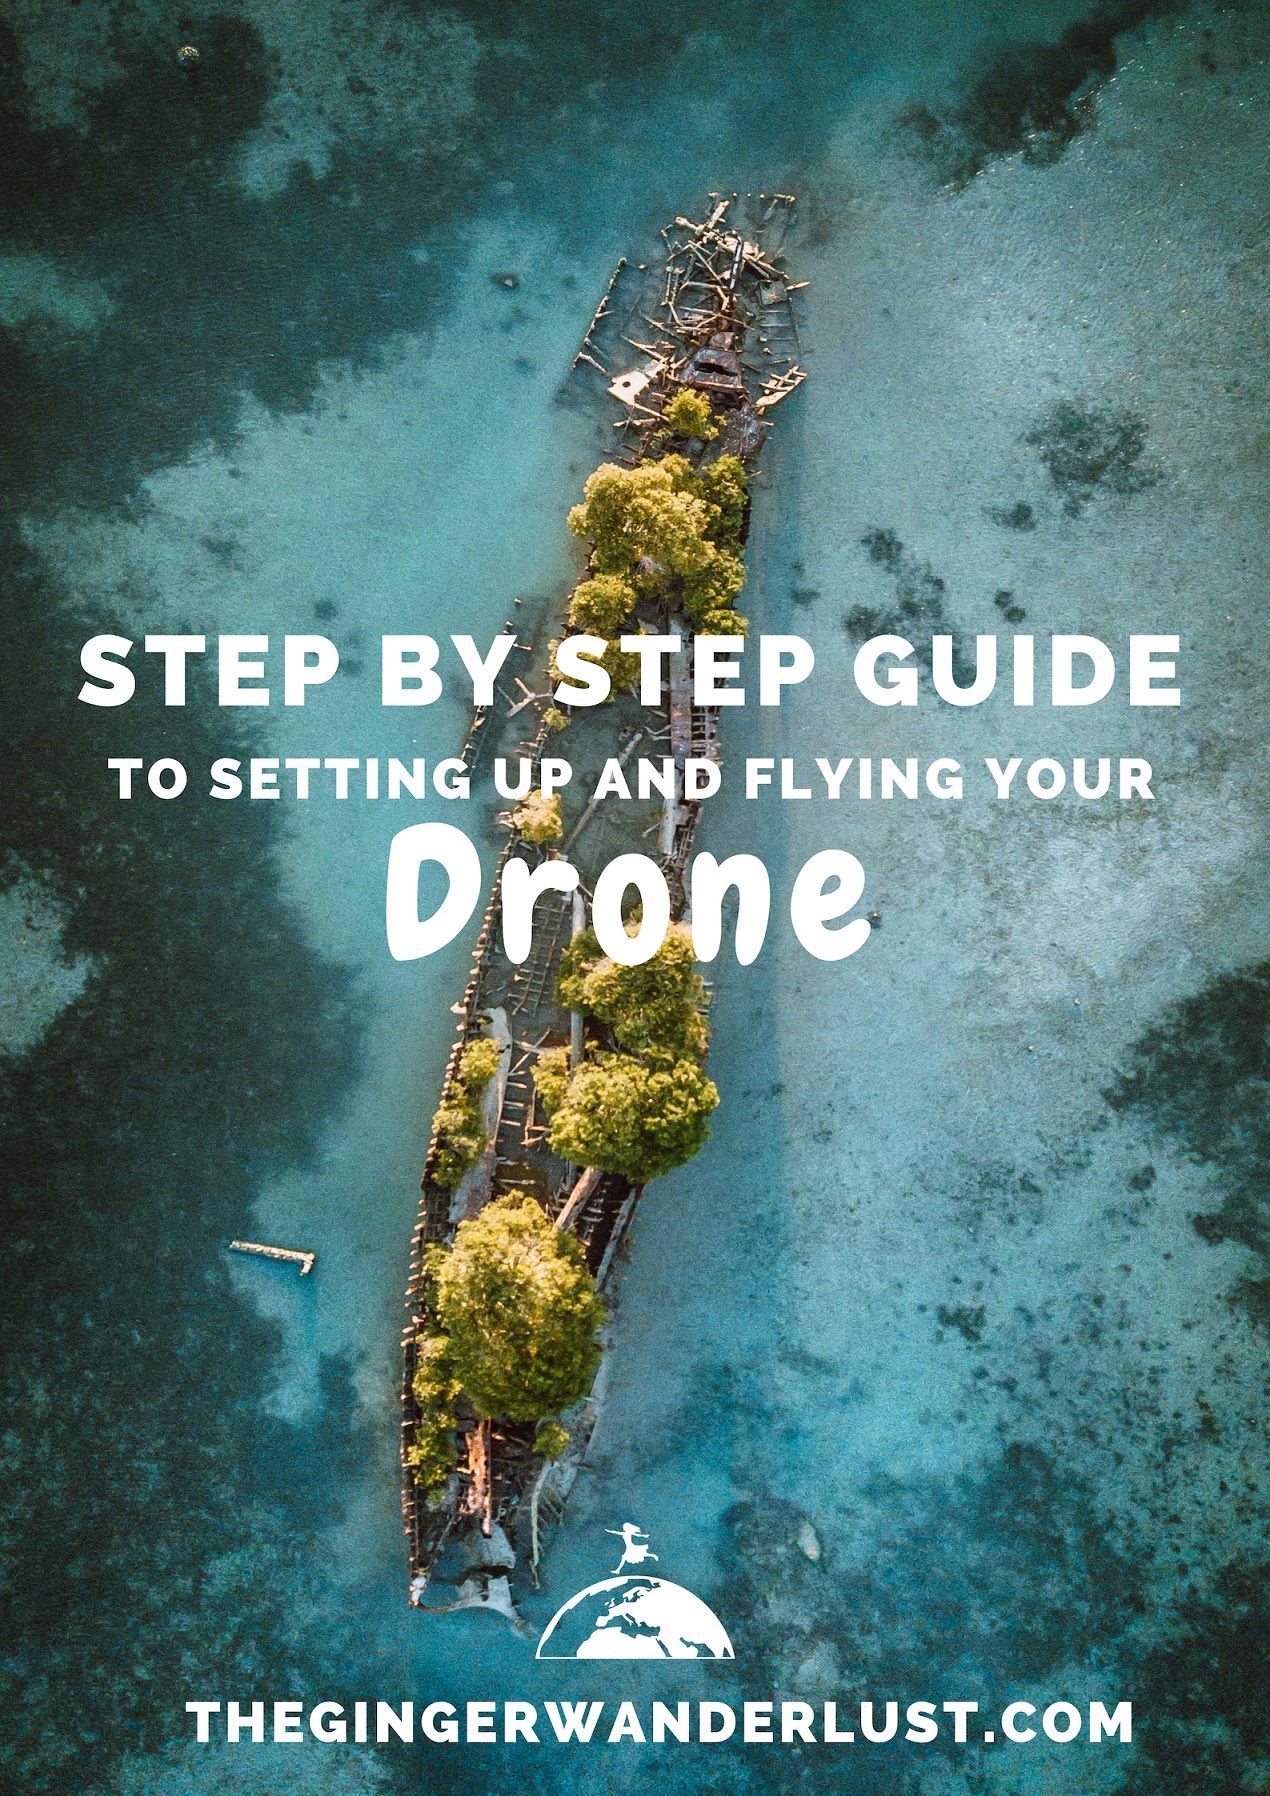 Step by Step Beginners Guide to Setting up and Flying Your Drone - The Ginger Wanderlust